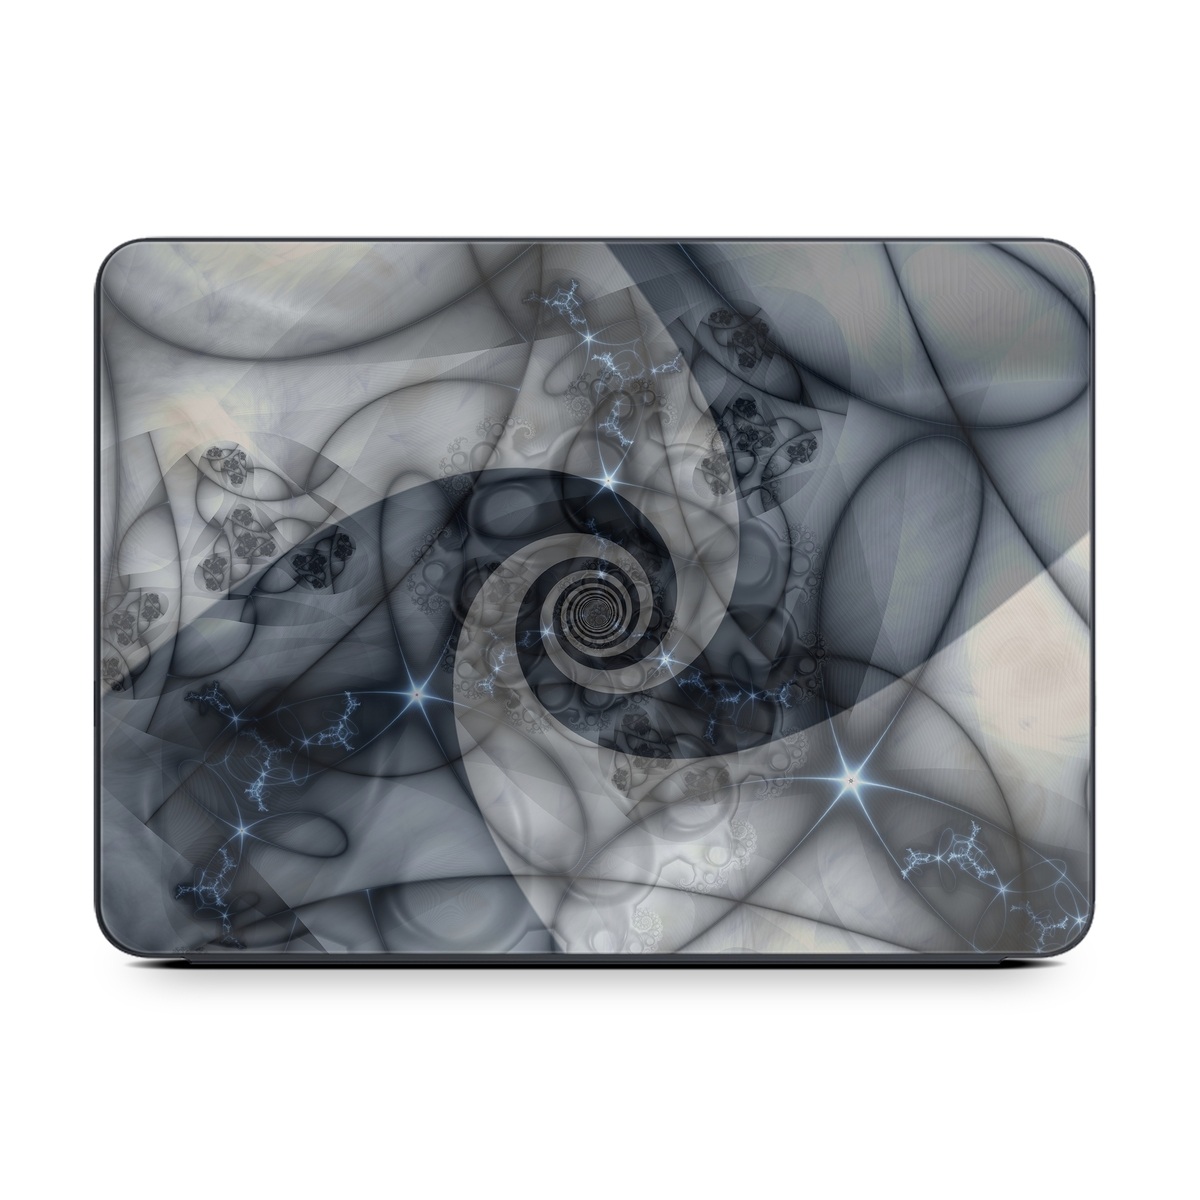 Smart Keyboard Folio for iPad Series Skin design of Eye, Drawing, Black-and-white, Design, Pattern, Art, Tattoo, Illustration, Fractal art, with black, gray colors